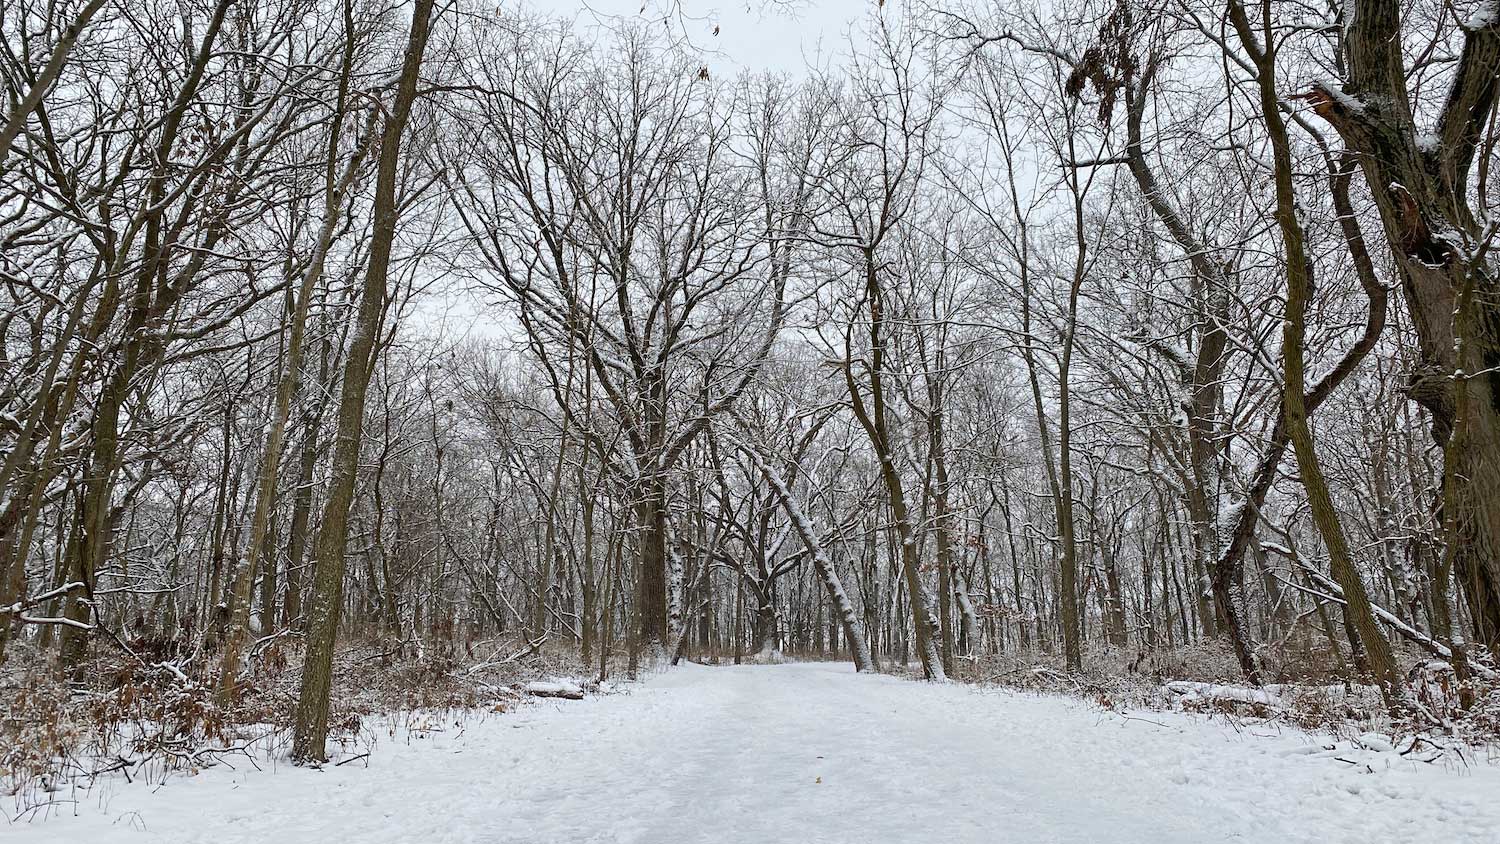 A snow-covered trail lined by trees.